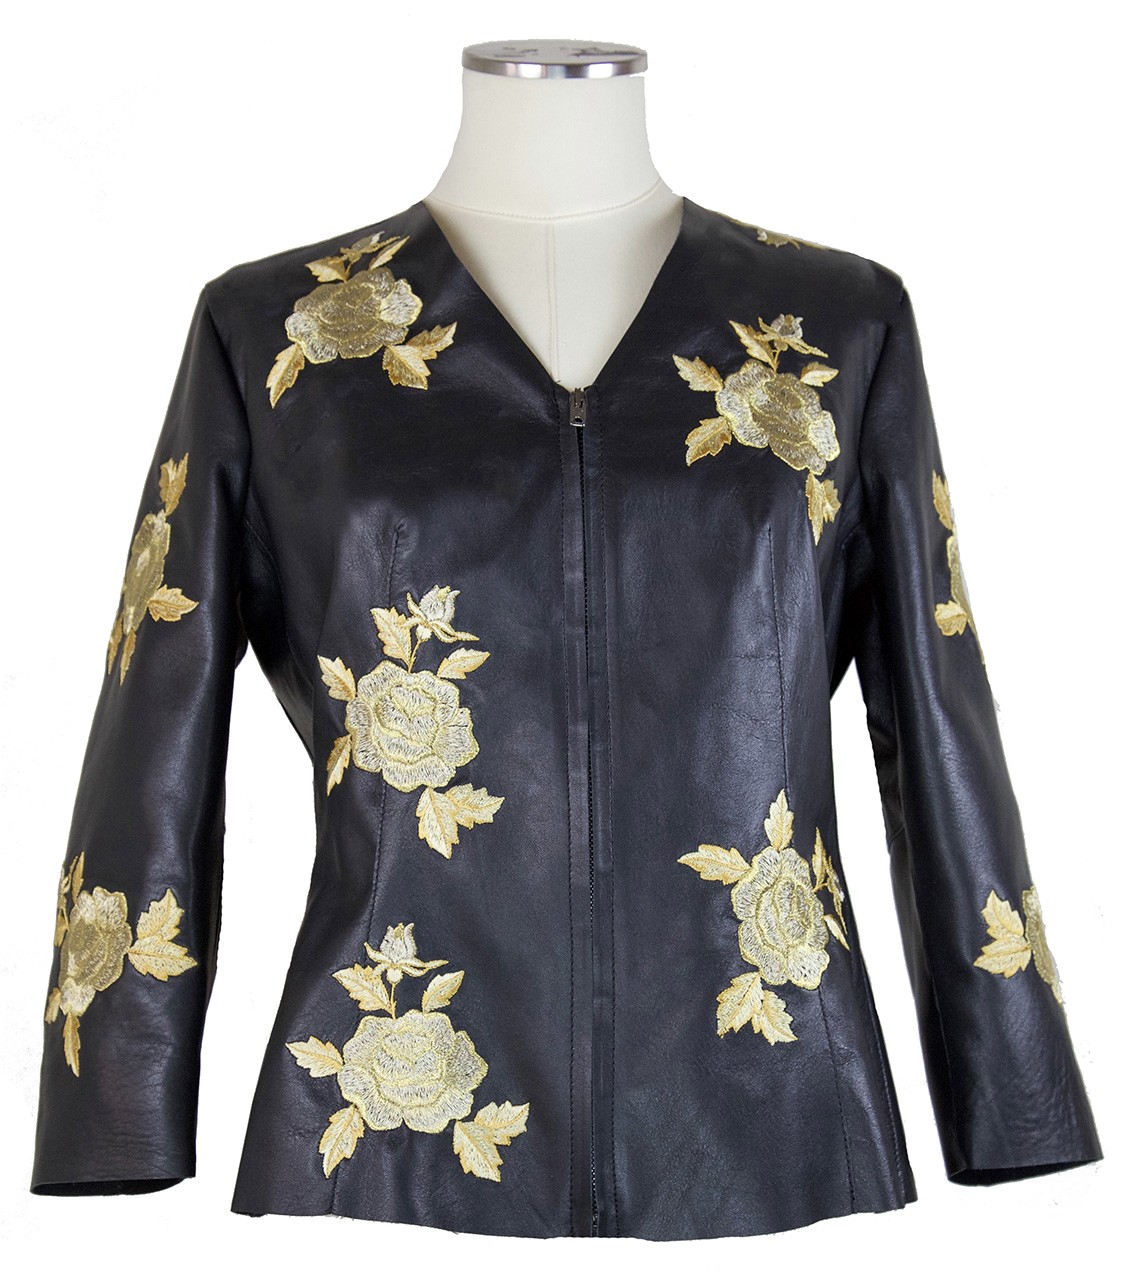 shop The Ivy  Jackets: Jackets The Ivy, V-neck, screwed, in black leather with golden roses embroidered, zip closure on front, without pockets, 3/4 sleeves. number 946